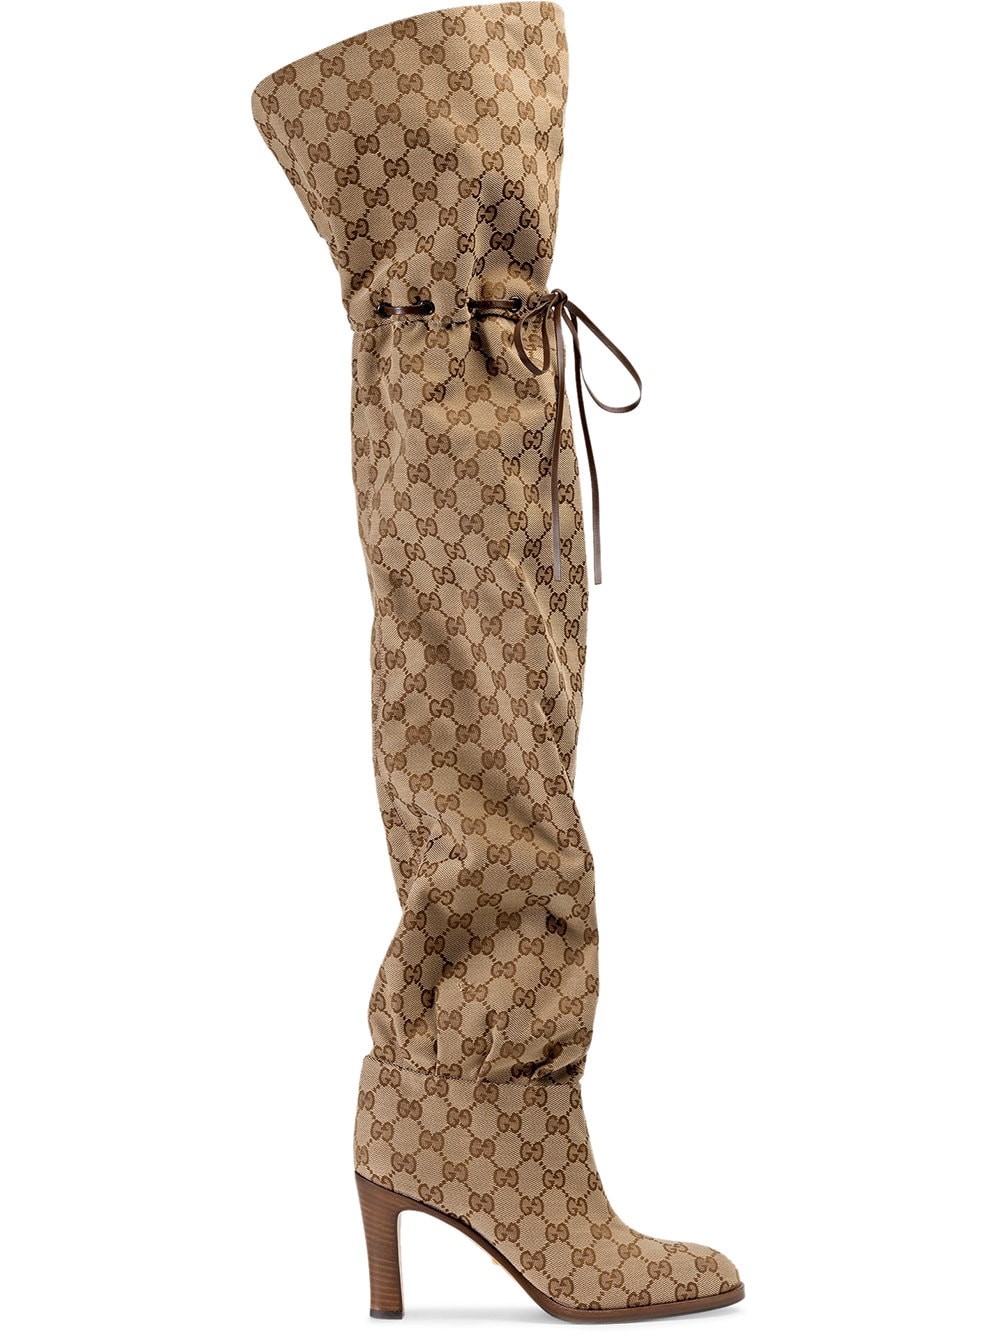 gucci GG PRINT OVER THE KNEE BOOTS available on montiboutique.com - 24590